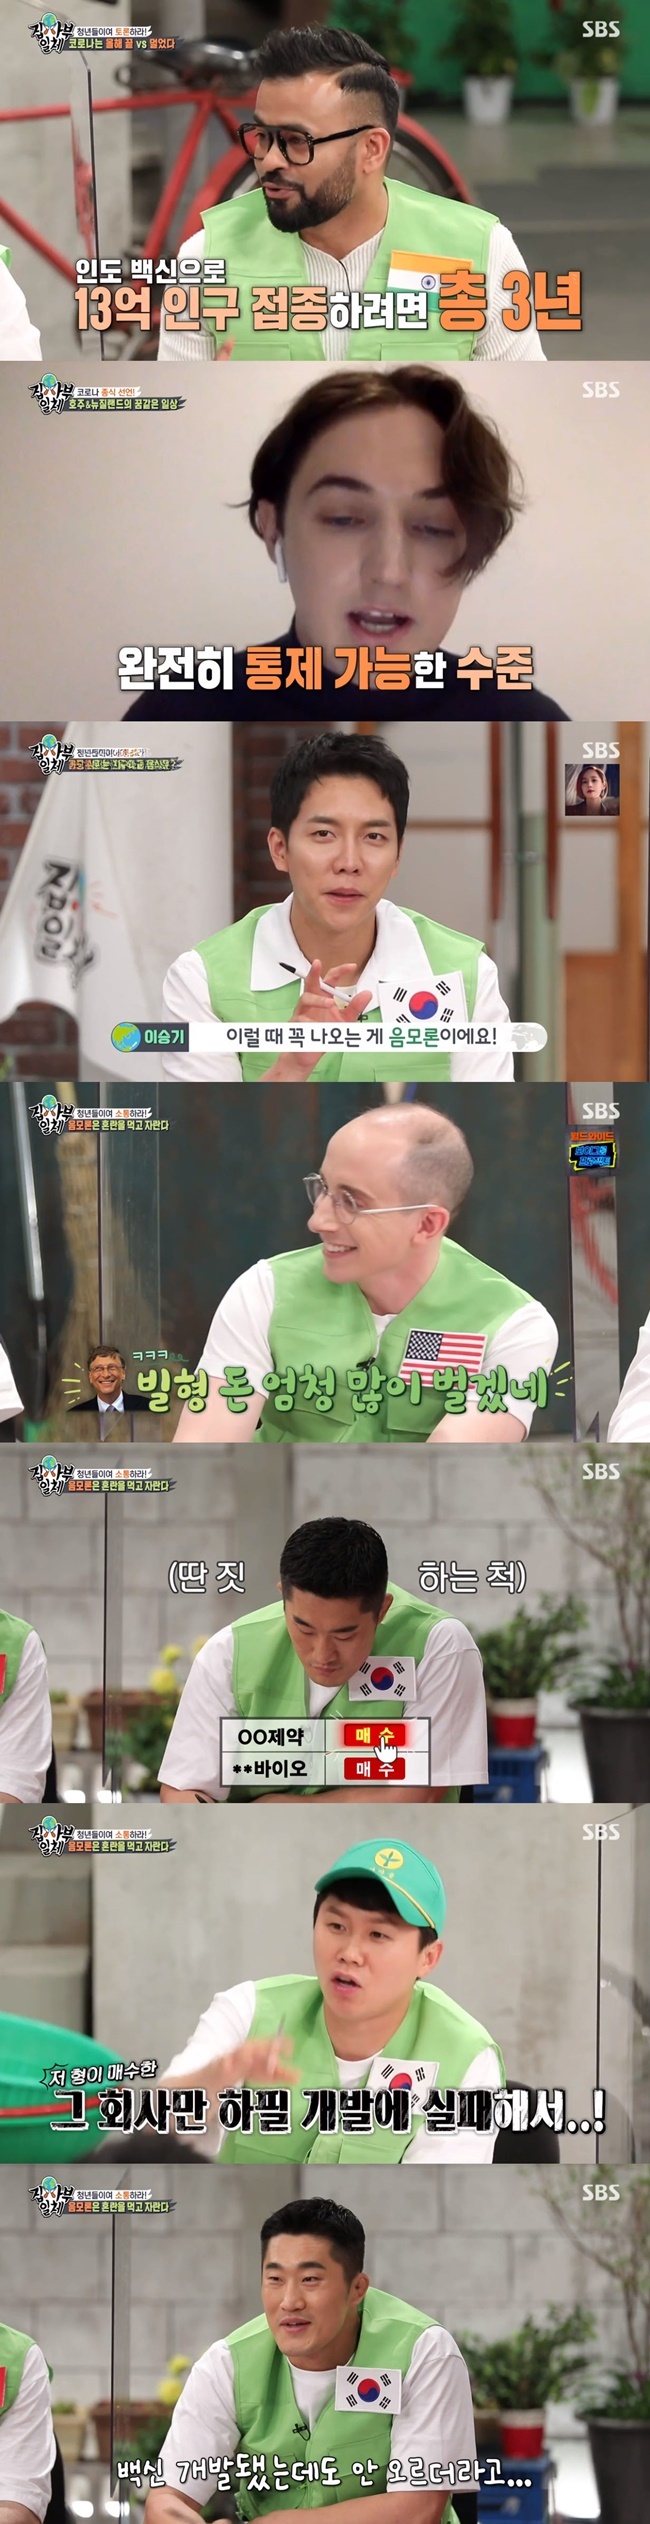 Yang Se-hyeong Disclosures the Investment Status of Kim Dong-HyunOn May 30, SBS All The Butlers held a Earth Youth Association to look back on the first half of the confused global village due to Corona 19.Along with the disciples, Italian Alberto, India Lucky, US Tyler, French Robin, and Chinese Magukjin appeared on the day. I was longing for a discussion with Mr. Tyler.There was a thing that Han () had made, he said, I tried to keep the middle, but there is no such thing here. Lets have a bloody discussion.The theme was The Corona 19 that haunts the Earth village is far from VS this year; the first vote was You can kick Corona 19 out.While I am talking now, two more were born, Lucky said. Vaccine penetration around the world is difficult this year.It takes a total of three years to inoculate the Indian population of 1.3 billion; it is hard to get Corona 19 out of the way within this year, in reality, he said.Theres a huge difference between whats reported on the news and whats real, Lucky said of her hometown India, which suffered from Corona 19.As for Rockdown, India has a large population, but there are many people who live in Haru.It made me starve to death and needed measures to secure jobs, he said. In the end, I opened theaters and stadiums in January.In addition, 200,000 people gathered for the election in seven states, he said, revealing the situation that Corona 19 had to deteriorate.Among them, a surprise video call with George Orwell, who returned to his hometown Australia at the end of last year, was concluded.George Orwell said, There are about 10 new confirmed people nationwide, all of them in isolation at the hotel. I walk around without a mask, go to a bar with my friends on weekends, and go to clubs.If Corona 19 is confirmed, it will be rocked down for about three days. It is thanks to the strong border blockade using the advantage of island country. In addition, the daily life changed due to Corona 19 was mentioned.From the emergence of the Copparazzi (corona 19+ paraparazzi, excess of cases of violations of anti-virus rules, false reporting), the public release of the line of motion, non-contact personnel, and weight gain were mentioned.The conspiracy theory was emphasized, and some of them were conspiracy theories that Bill Gates planted microchips in Vacine to manipulate people.Bill will make a lot of money. 